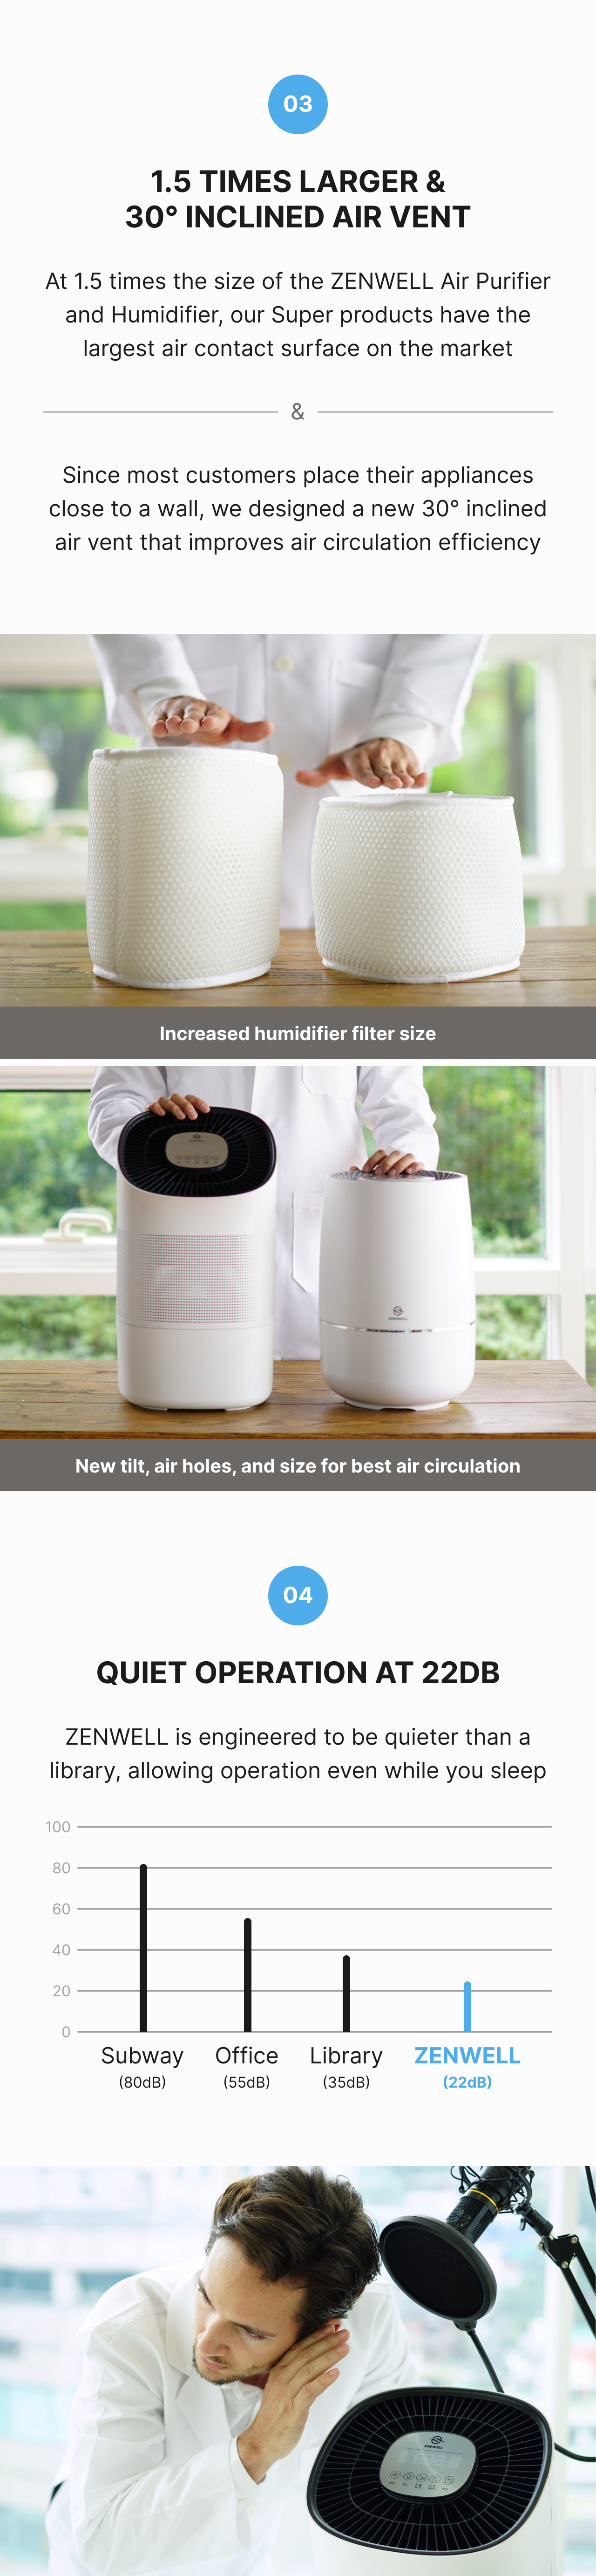 Super Humidifier Smart product description image describing how this unit and its filter are 1.5 times larger than the regular humidifier and this unit has a 30 degree inlined vent that better circulates air while sitting next to a wall, where people normally keep their devices. The operation is at the same low 22 decibles, quieter than a library.